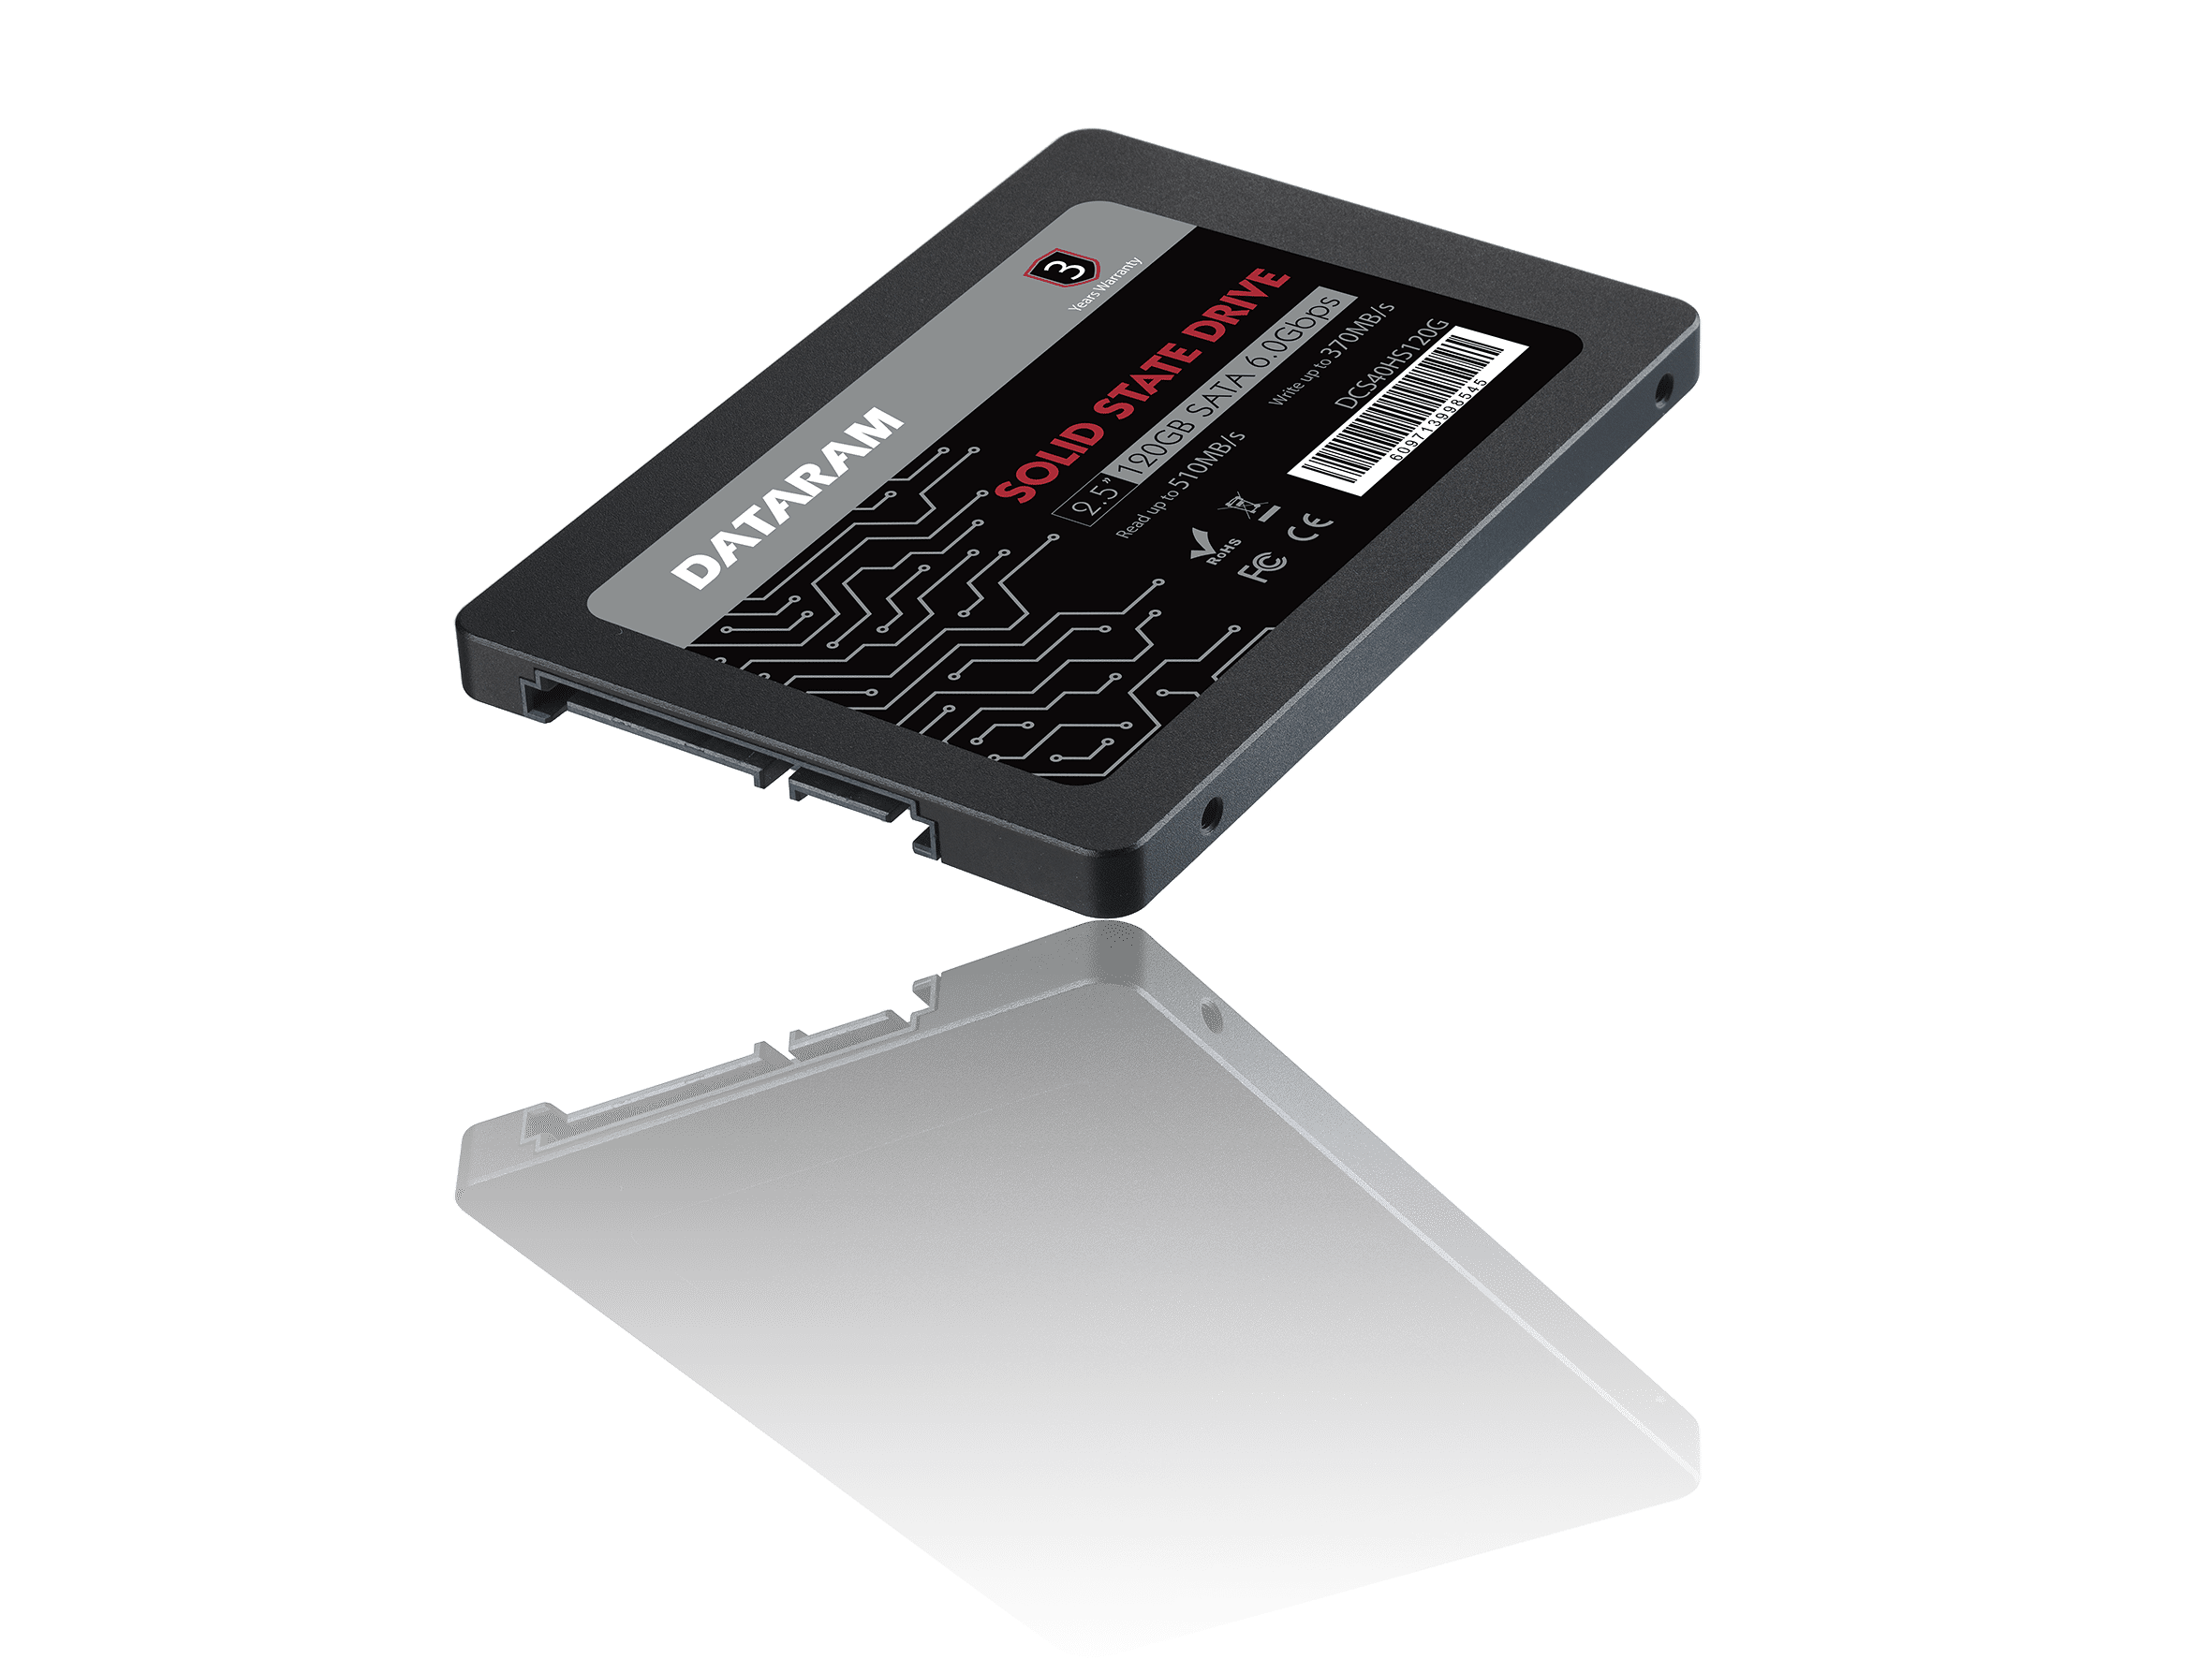 jeg er glad klap Bungalow DATARAM 120GB 2.5" SSD Drive Solid State Drive Compatible with MSI A320M  PRO-VD/S - Walmart.com